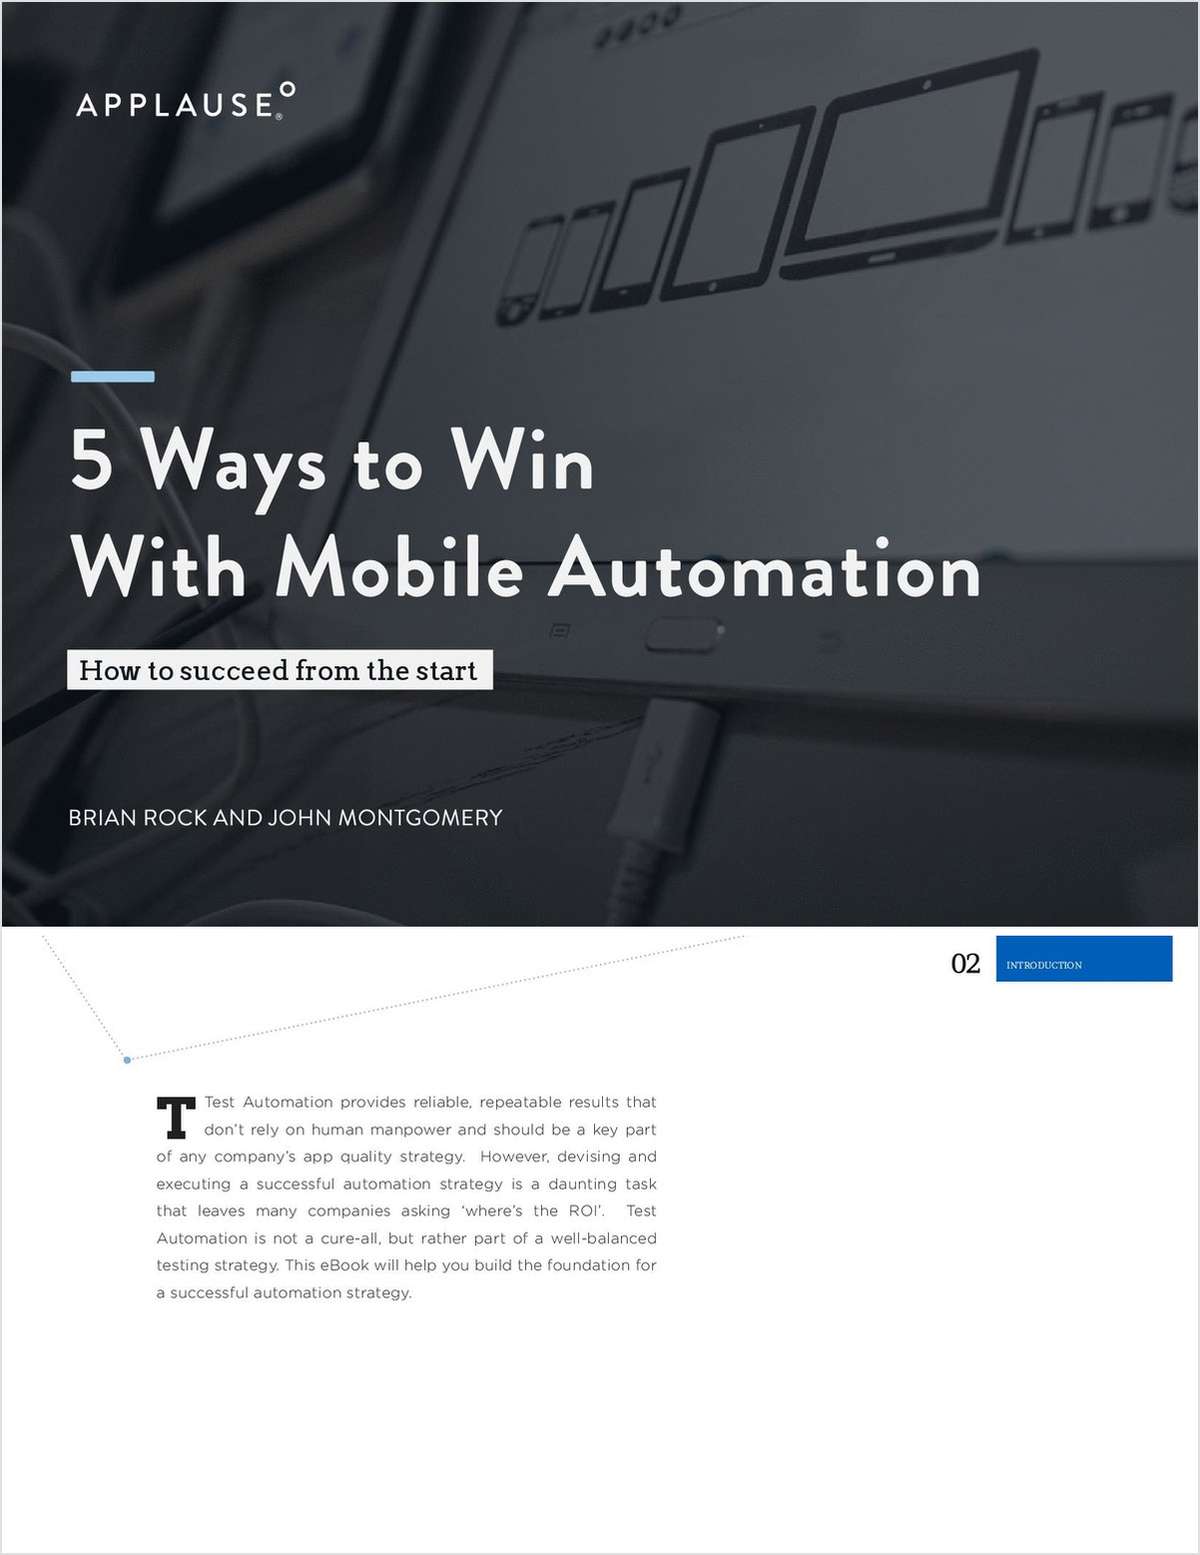 5 Ways to Win with Mobile Automation